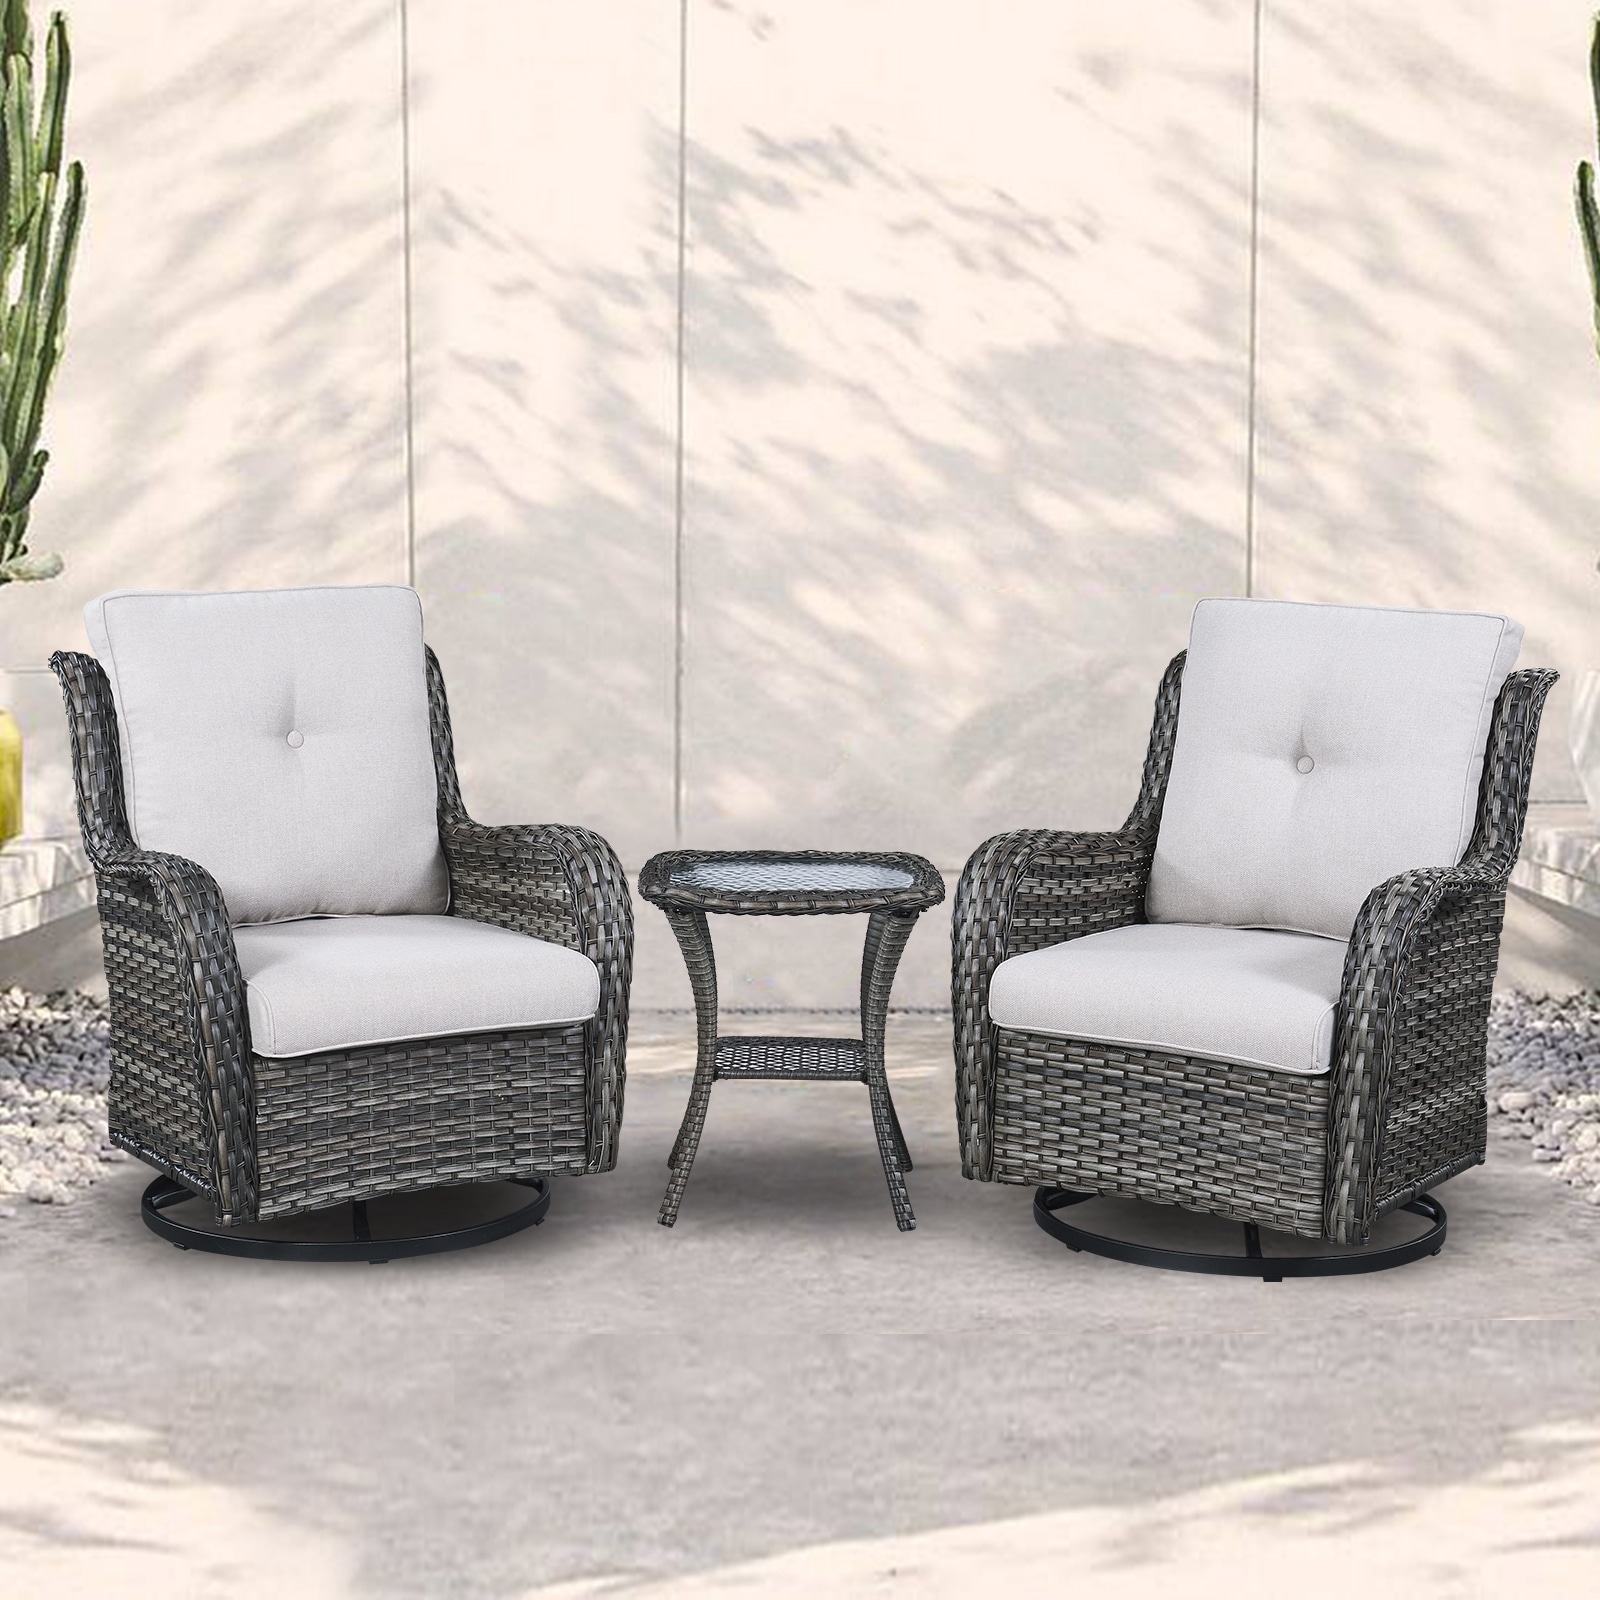 Outdoor Swivel Rocker Patio Chairs With Table Set Of 2